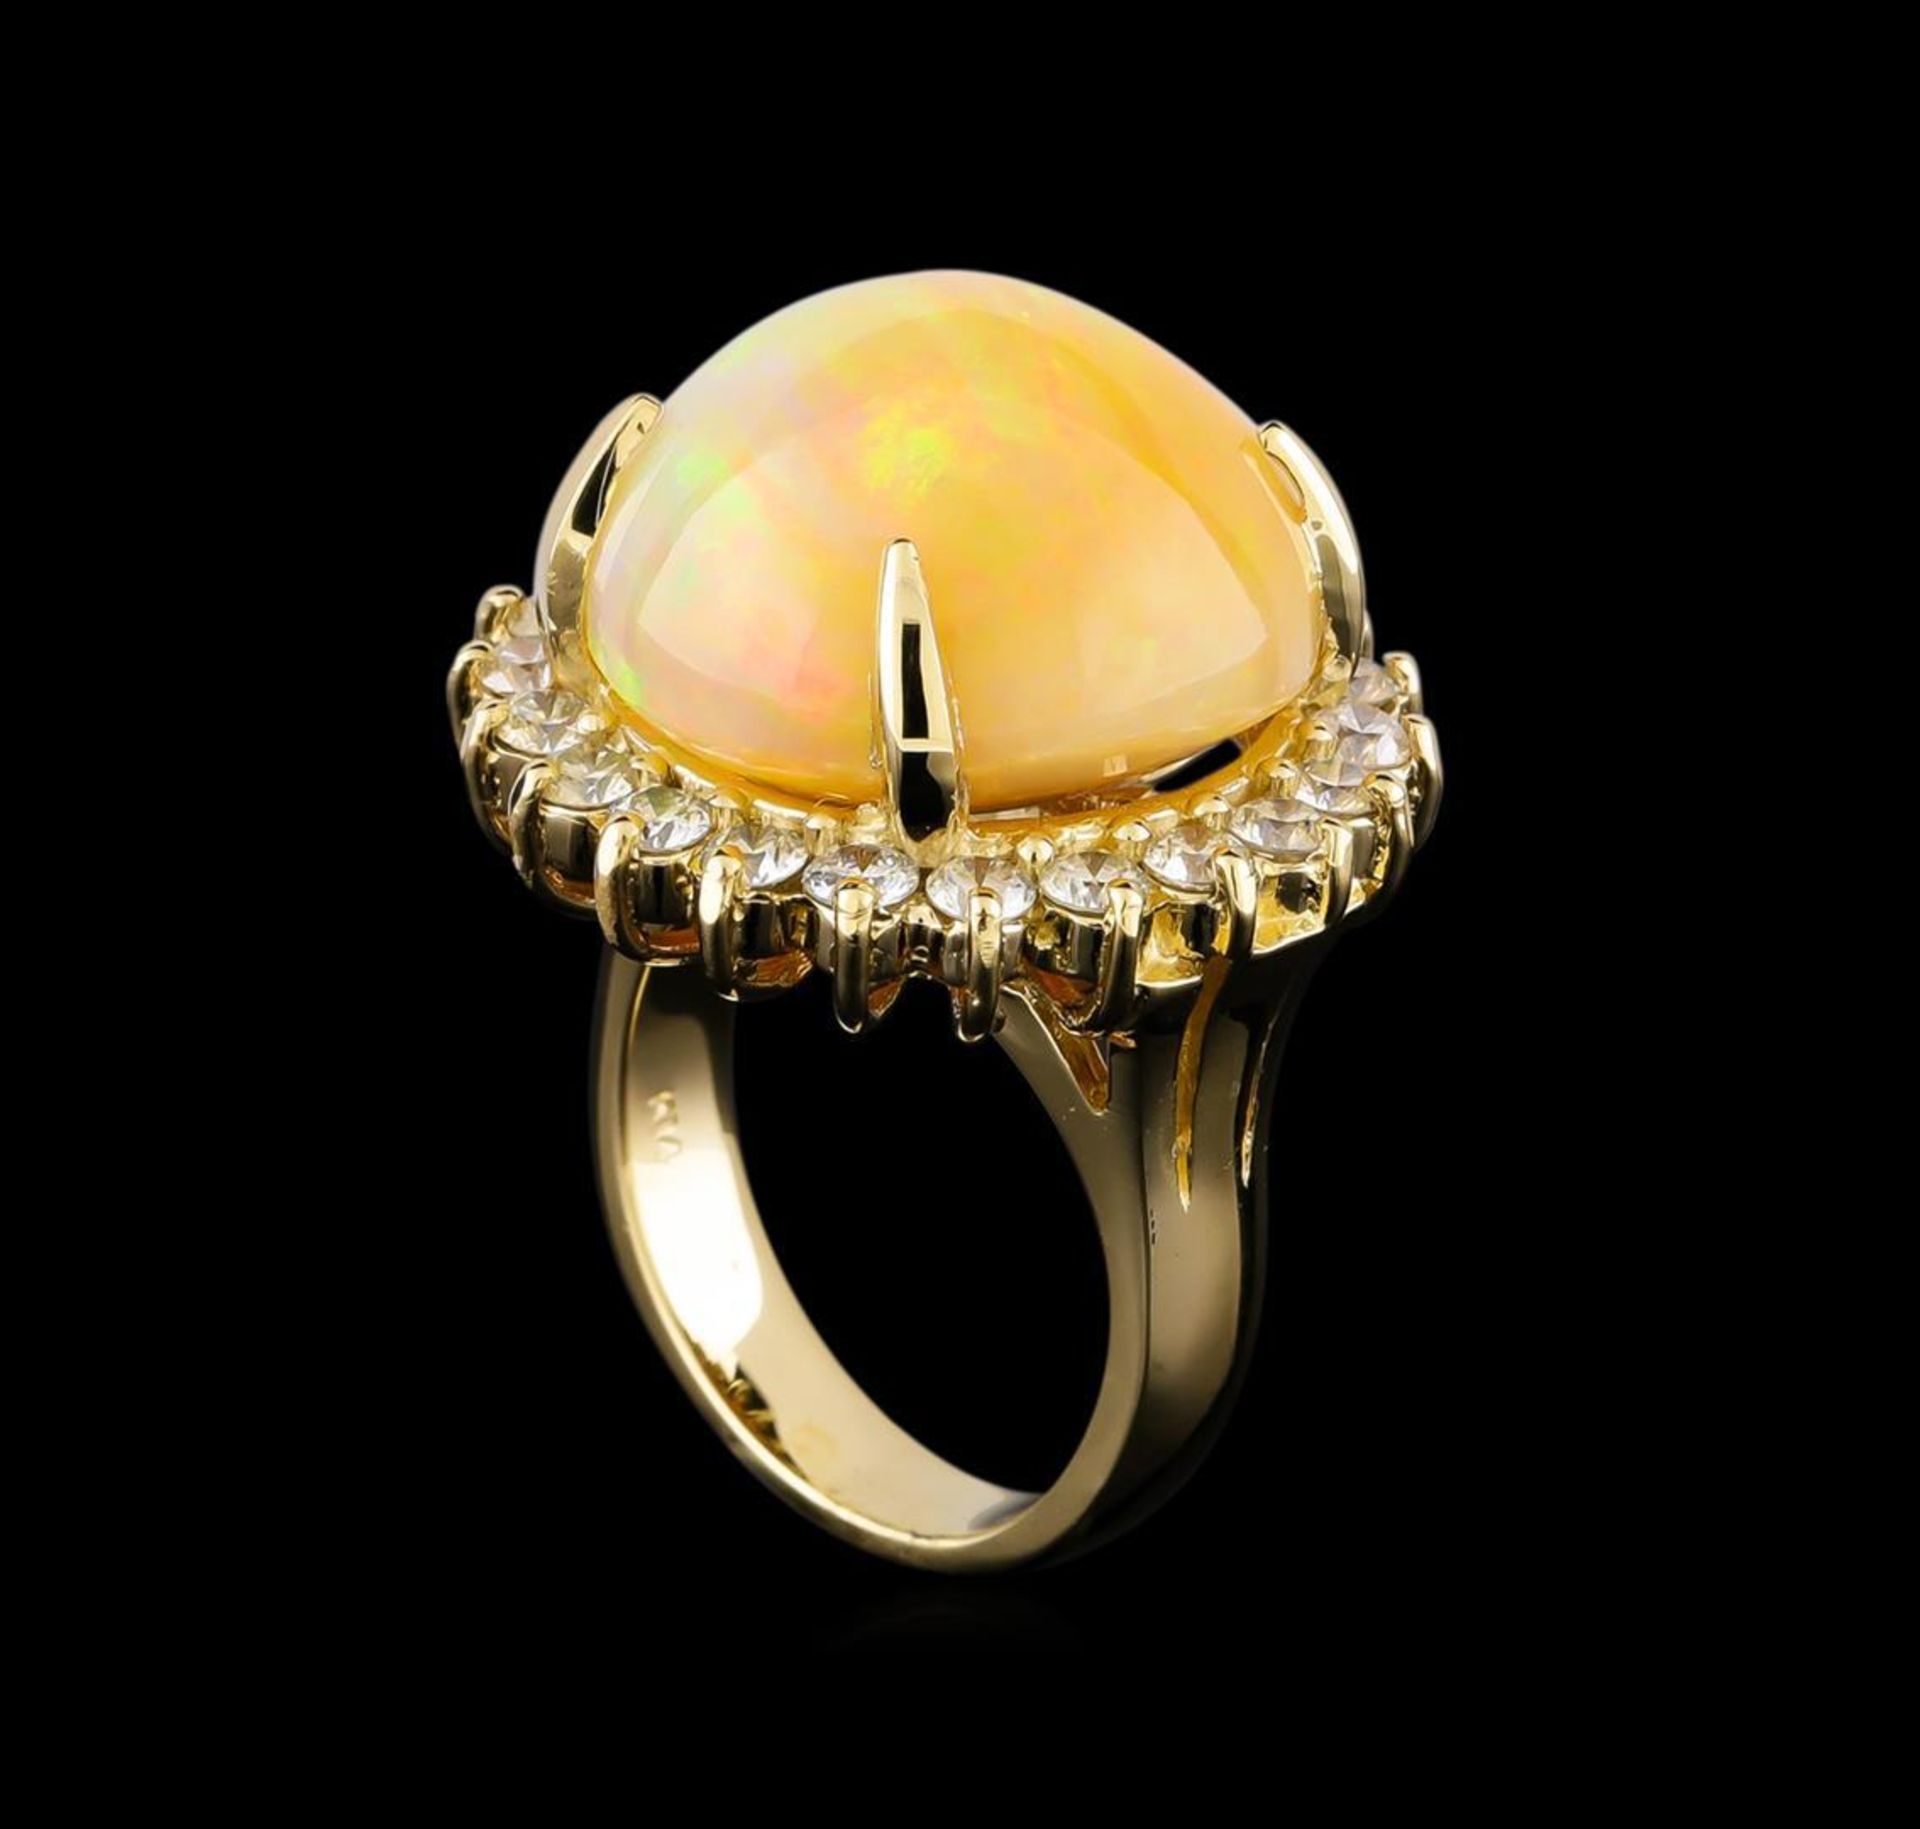 19.85 ctw Opal and Diamond Ring - 14KT Yellow Gold - Image 4 of 5